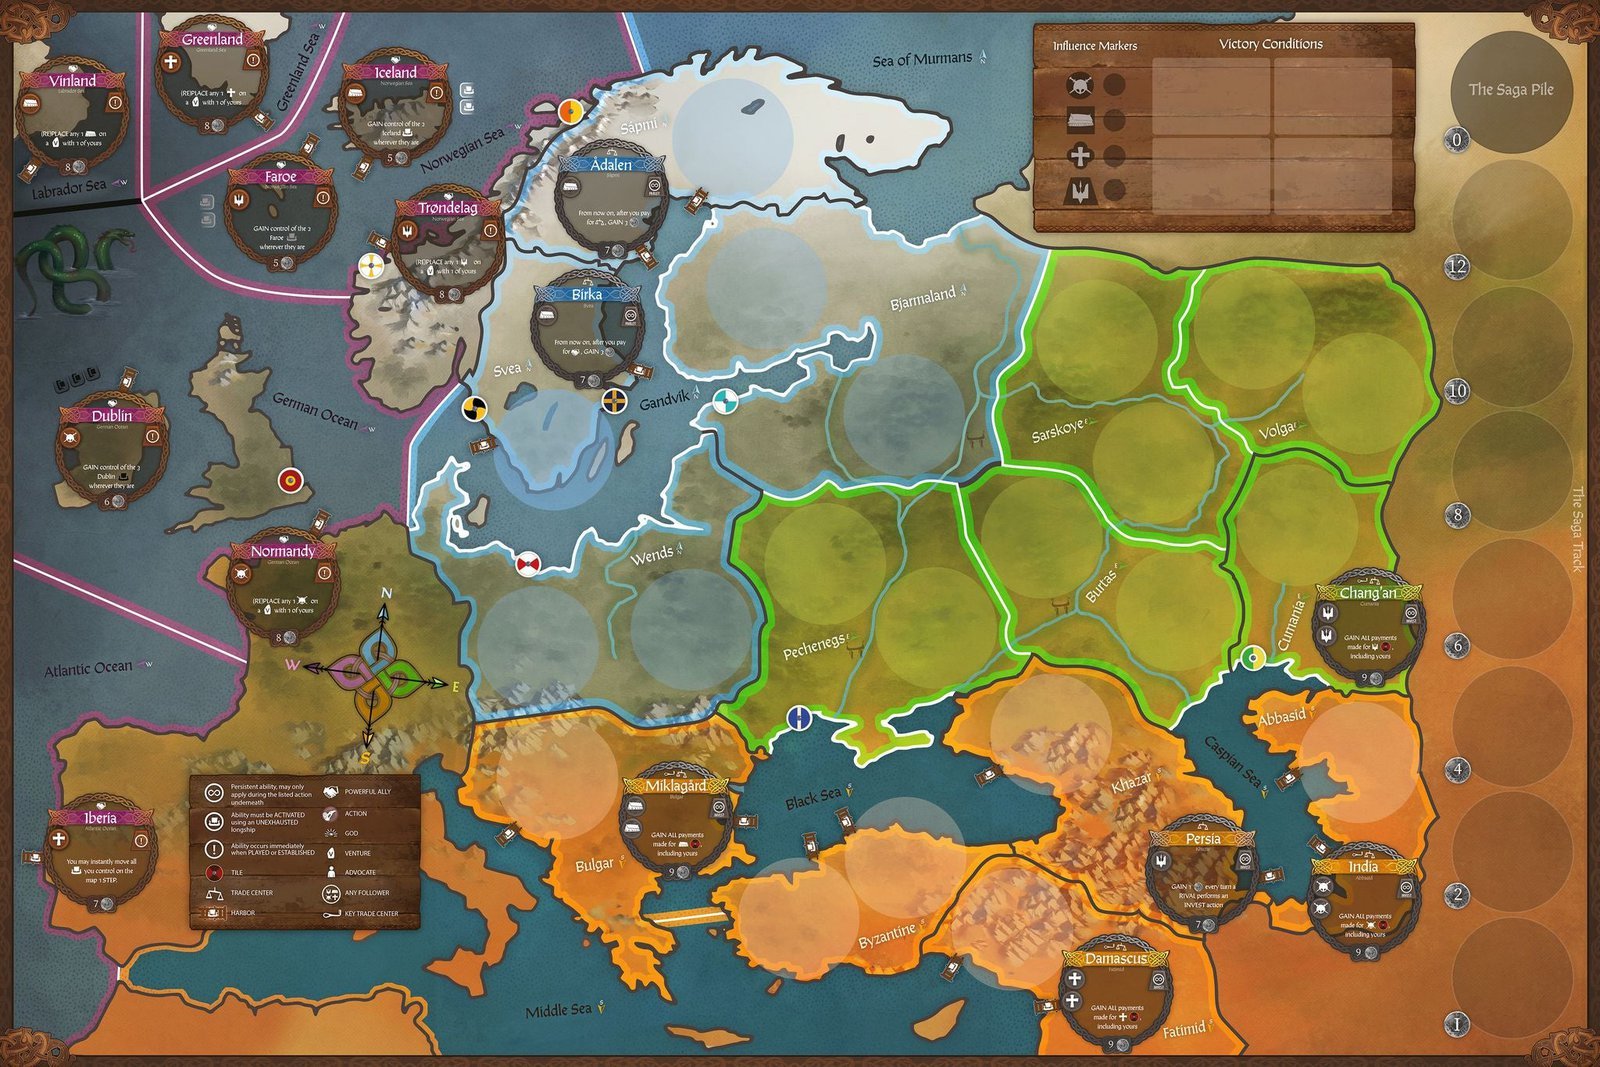 PAX Viking Board Game - Direct view of the game board